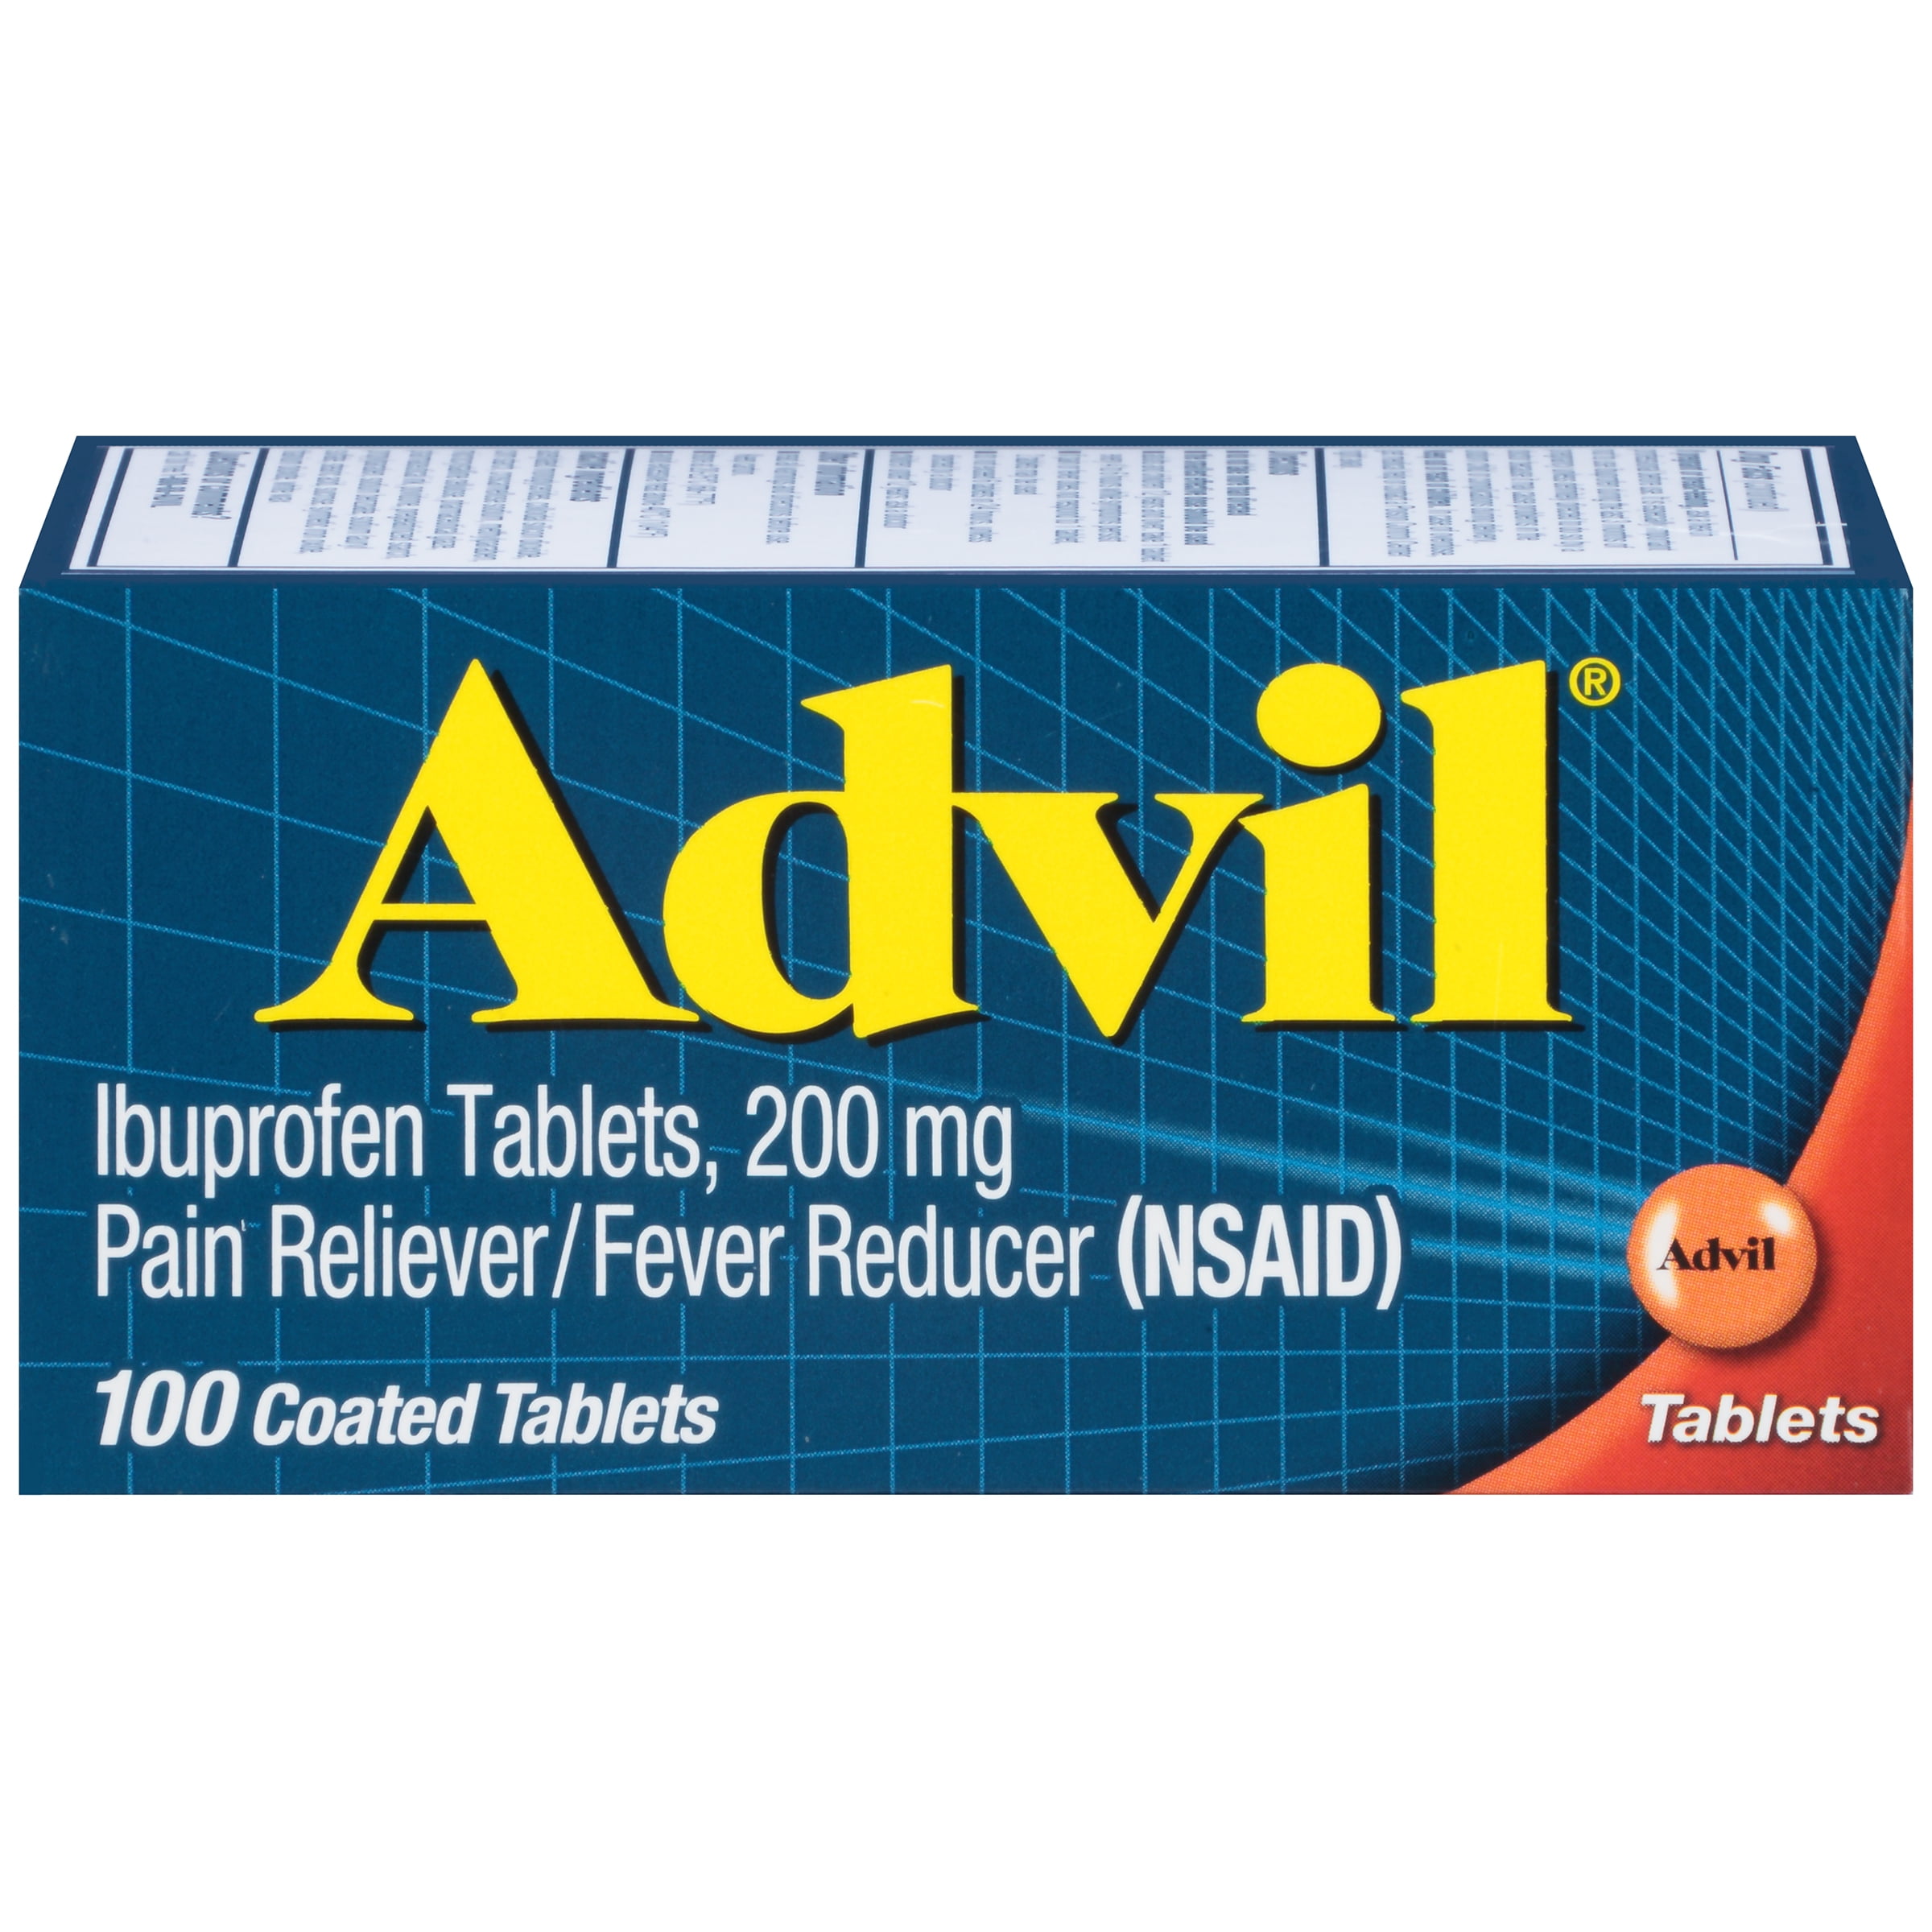 Advil Pain Reliever Fever Reducer Ibuprofen Coated Tablets 200 Mg 100 